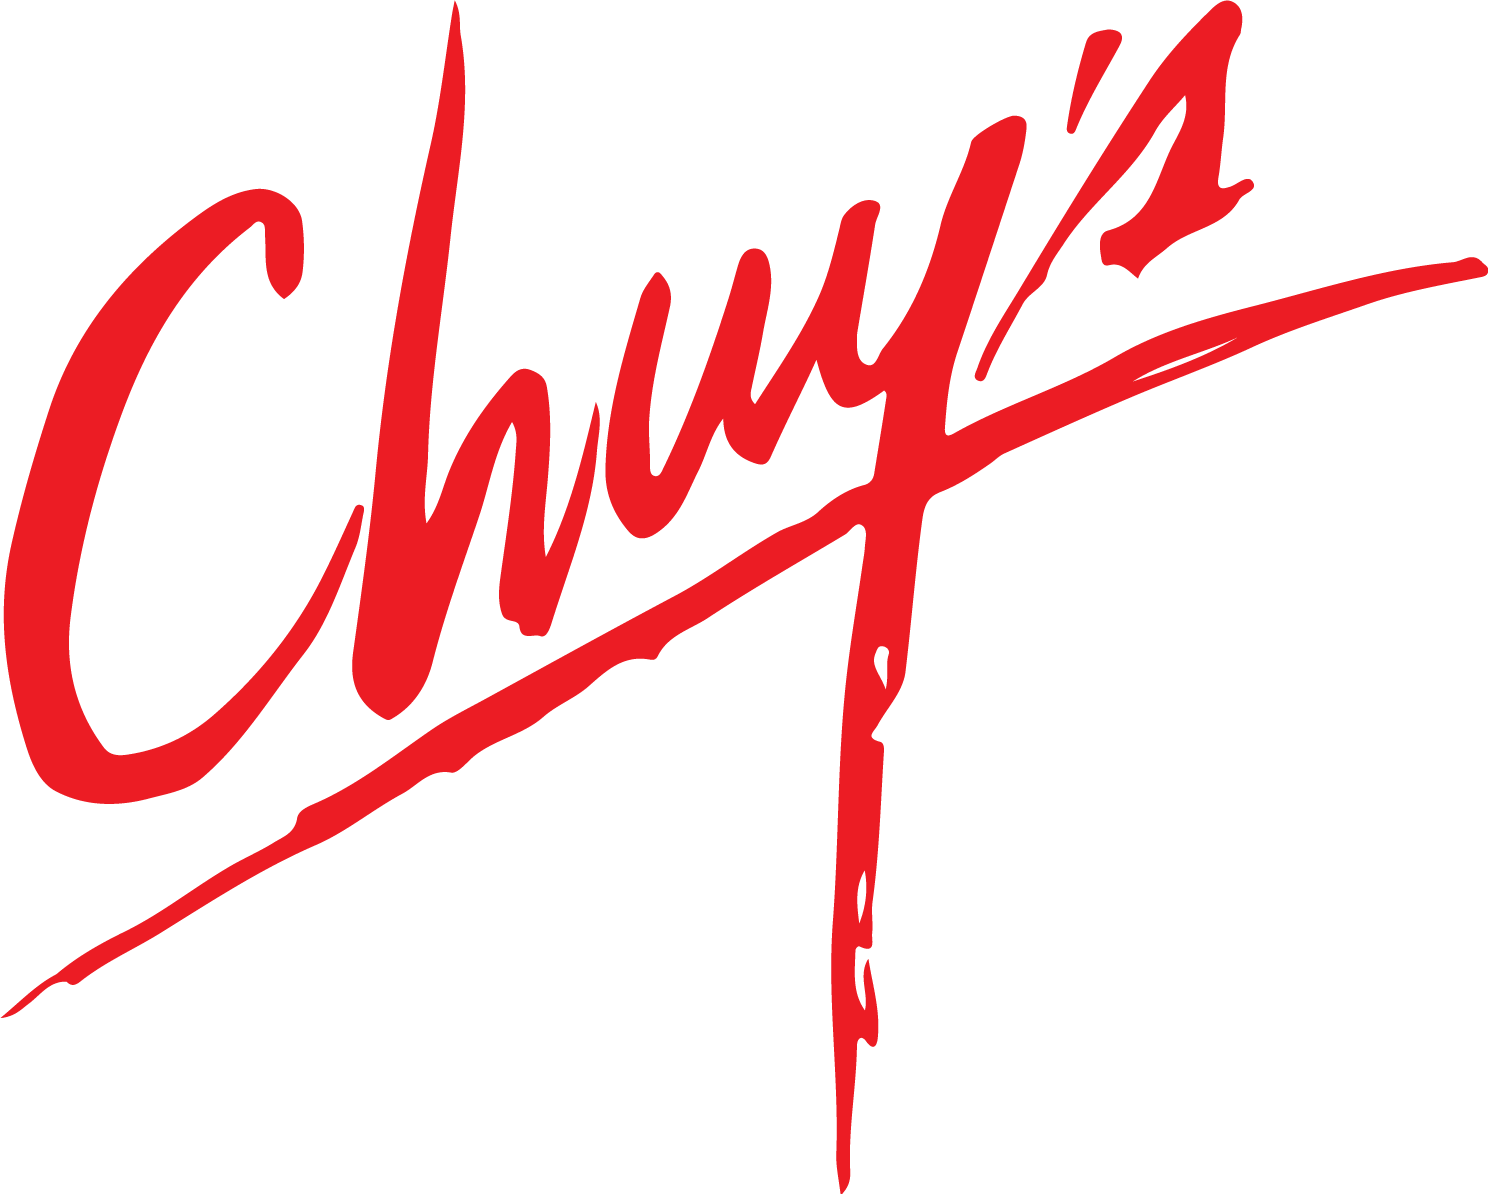 Chuy's
 logo large (transparent PNG)